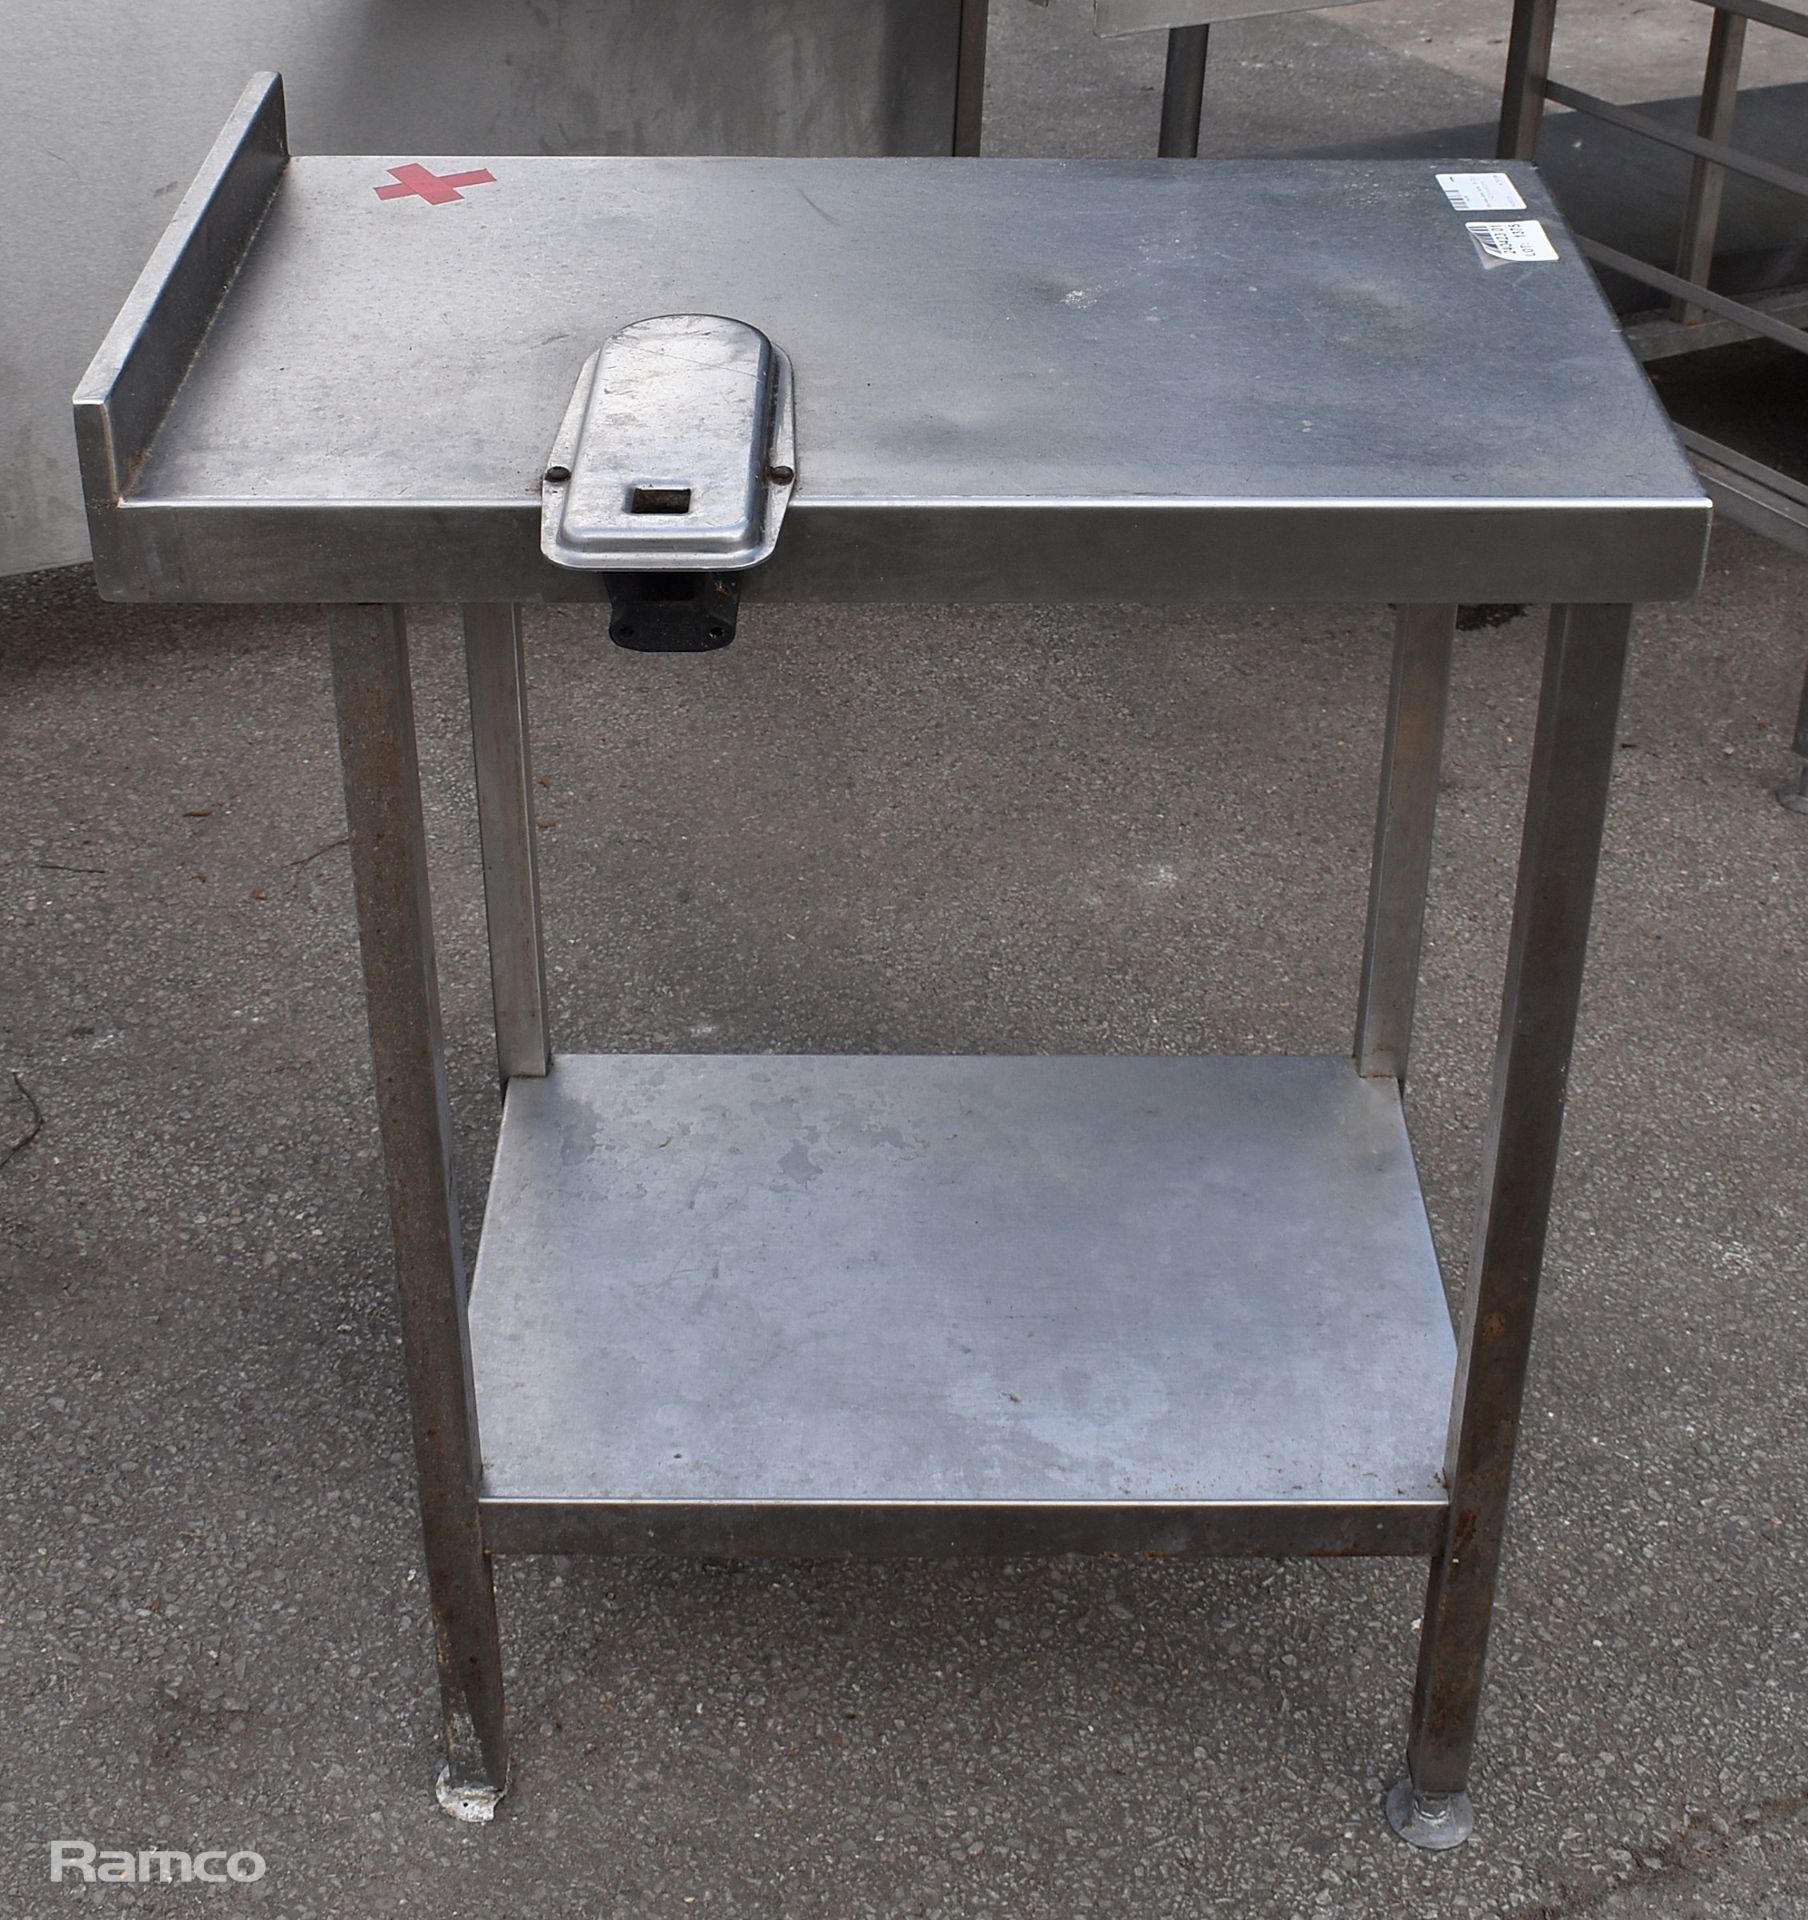 Stainless steel table - W 700 x D 420 x H 900mm - with can opener holder - Bild 3 aus 3